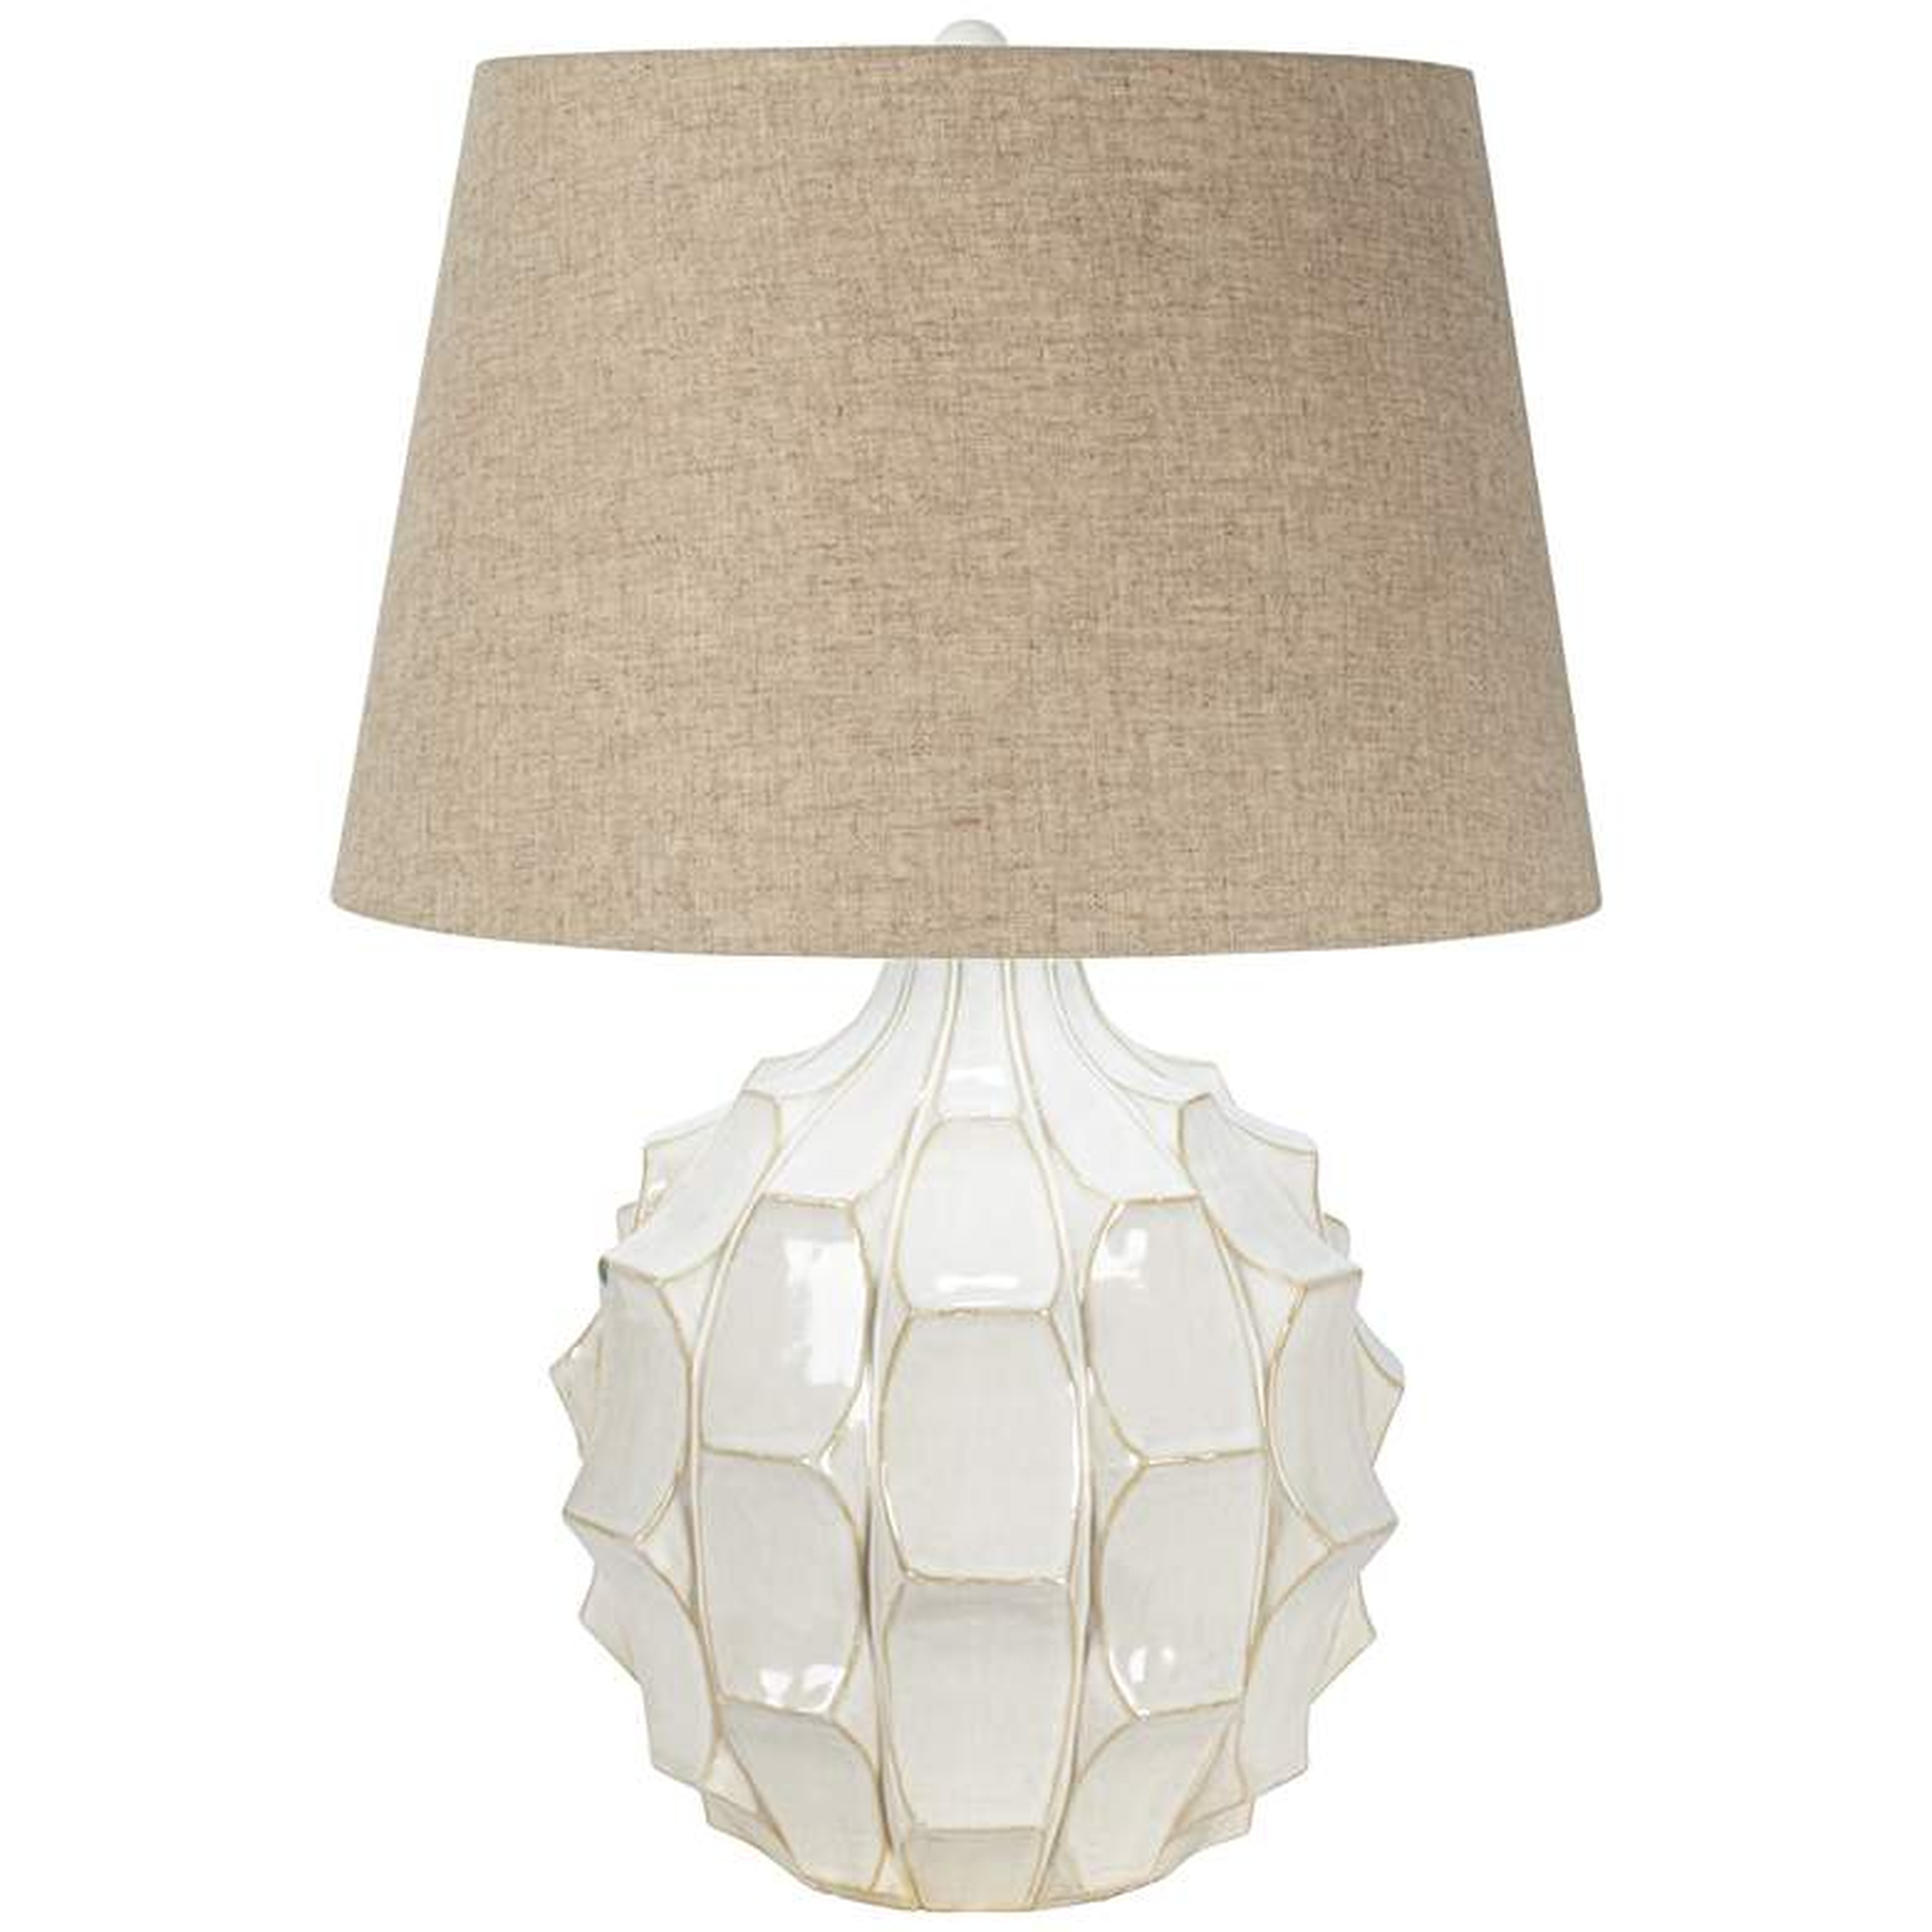 Cosgrove Round Ceramic Modern Table Lamp With Dimmer, White - Lamps Plus